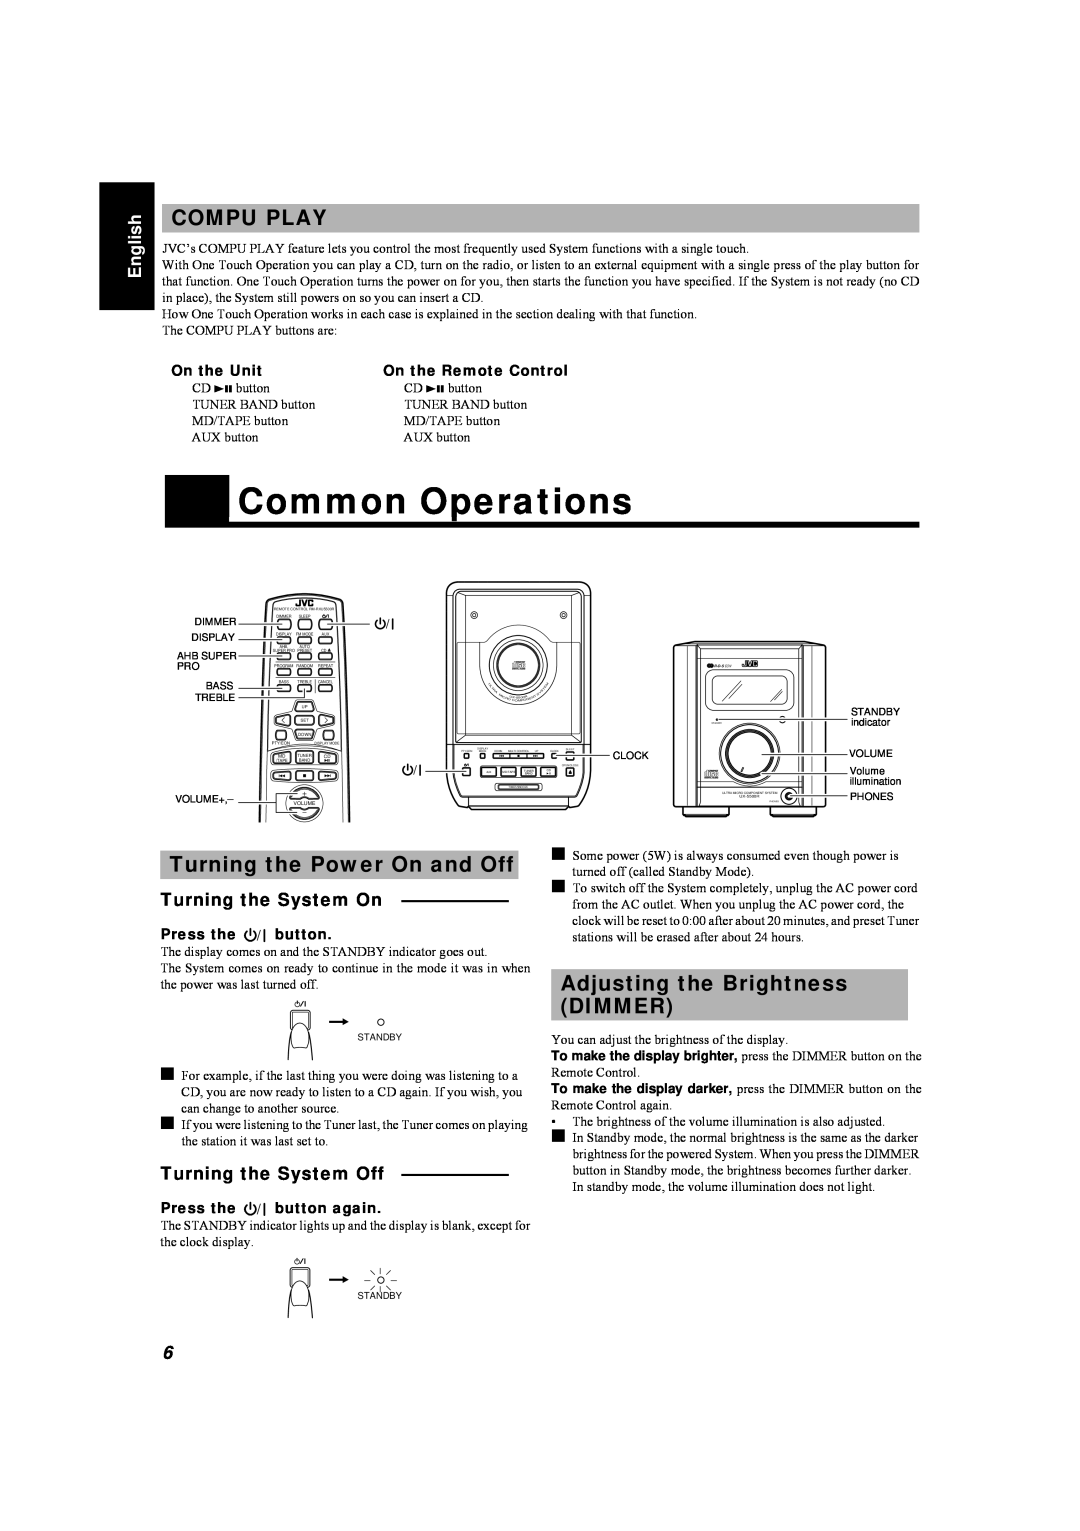 JVC UX-5500R manual Common Operations, Compu Play, Turning the Power On and Off, Adjusting the Brightness DIMMER, English 